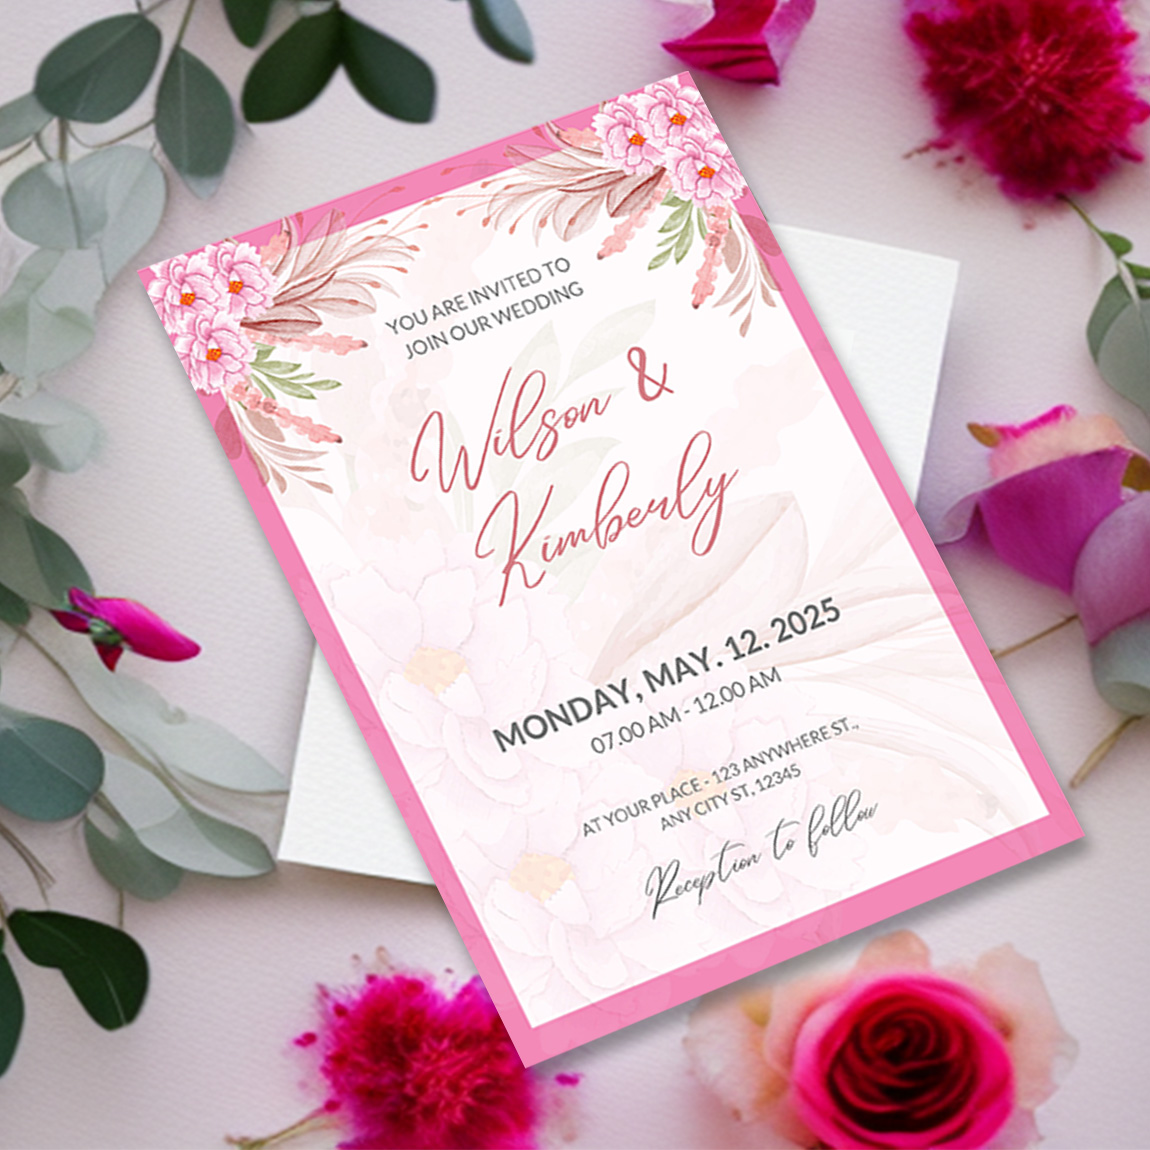 Image with gorgeous wedding invitation card with flowers.